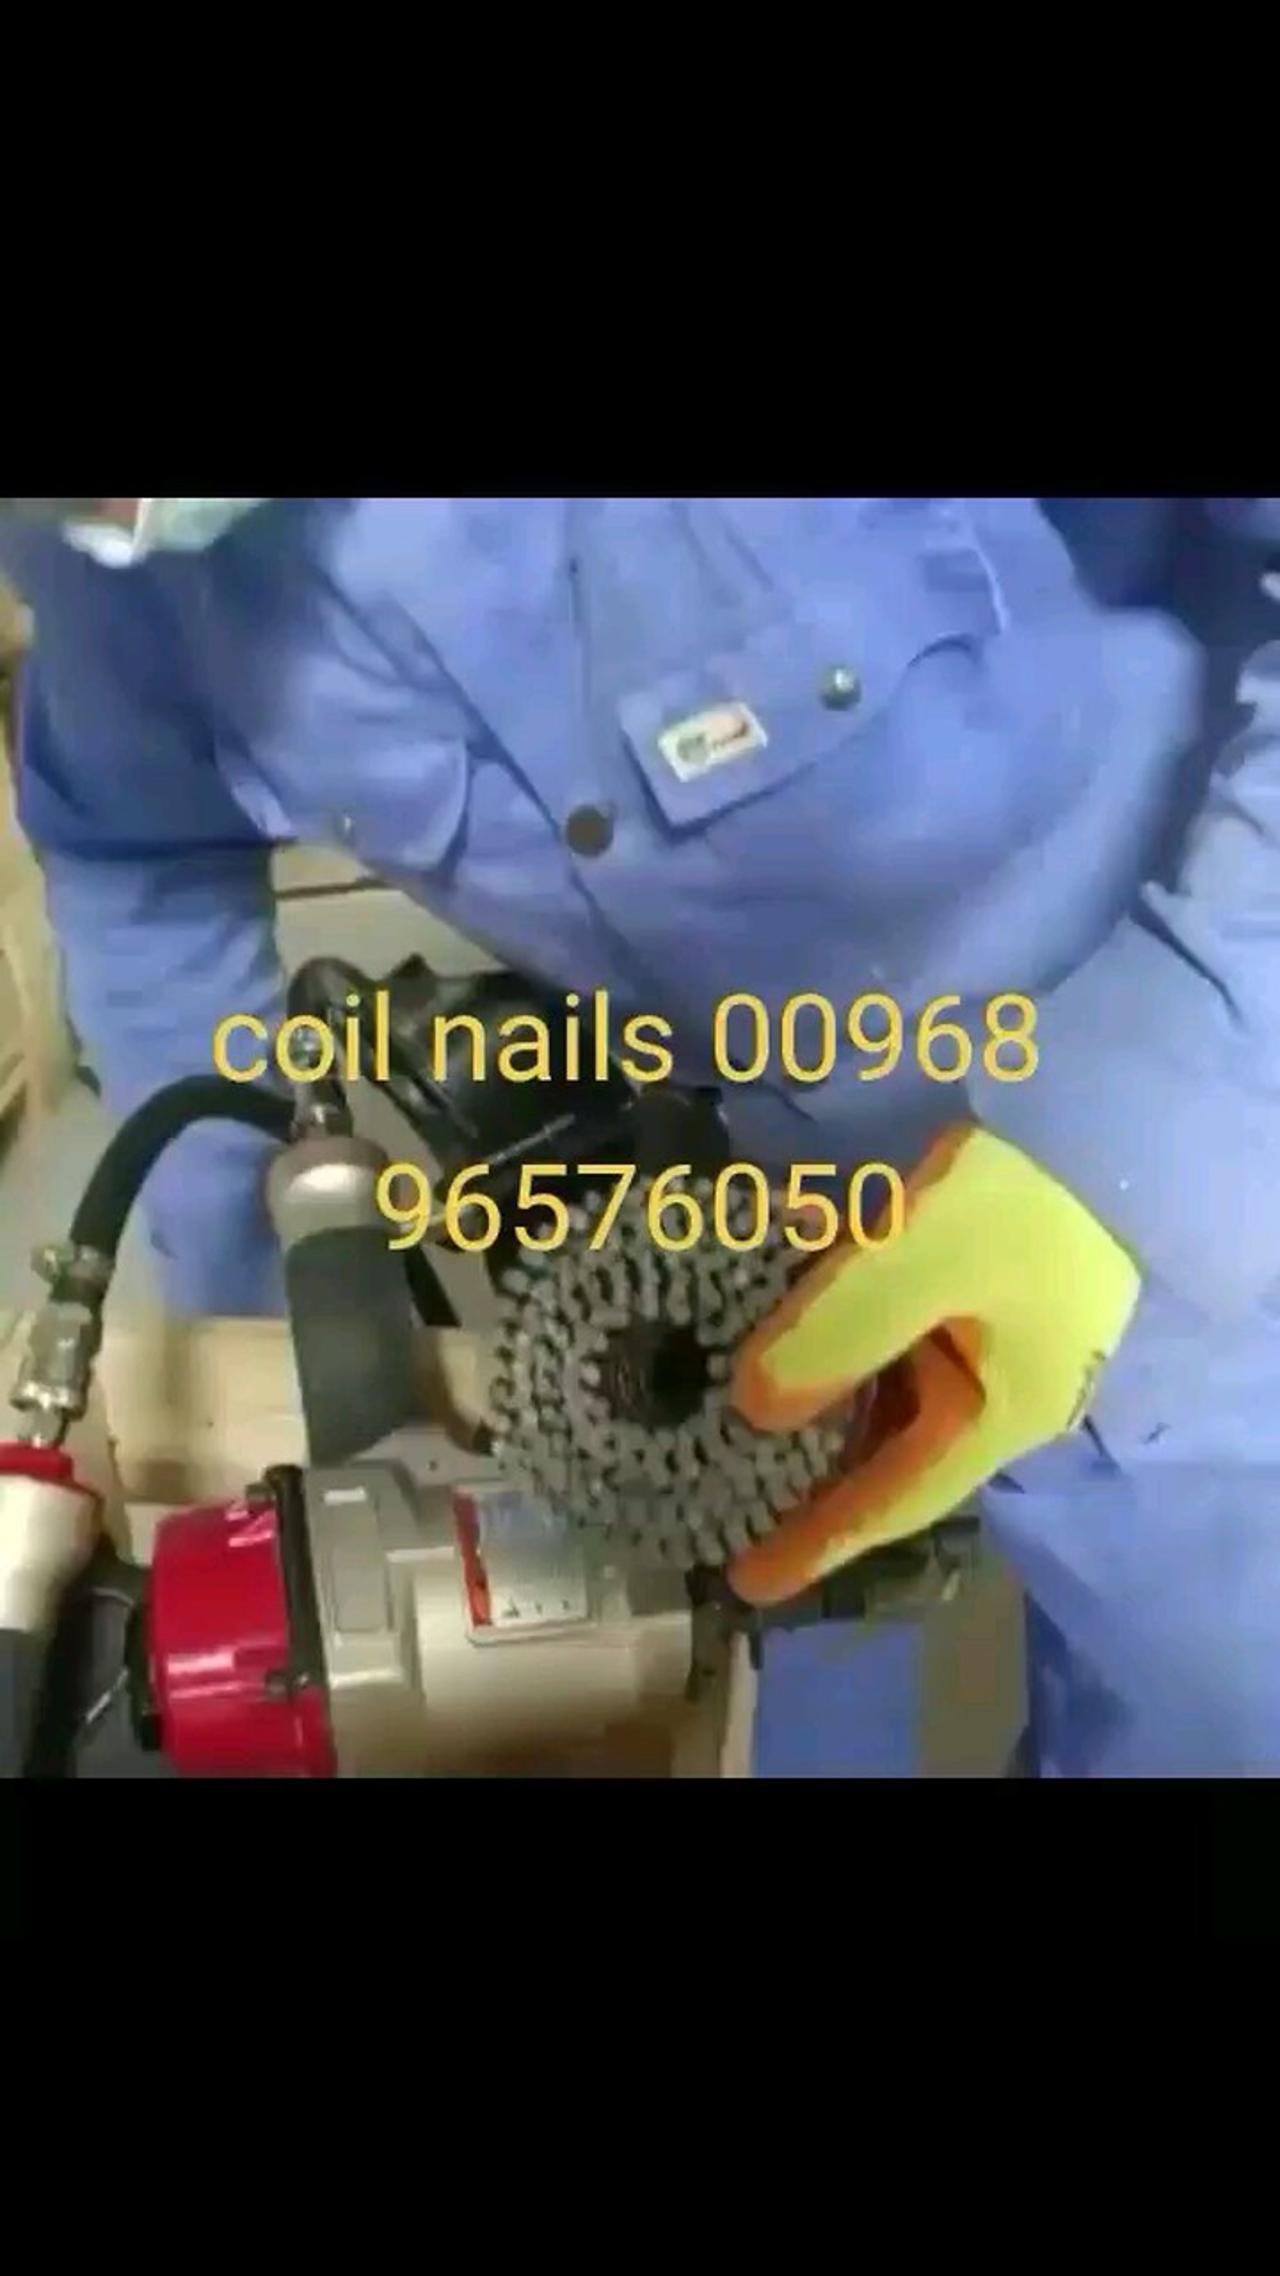 coil nails manufacturing